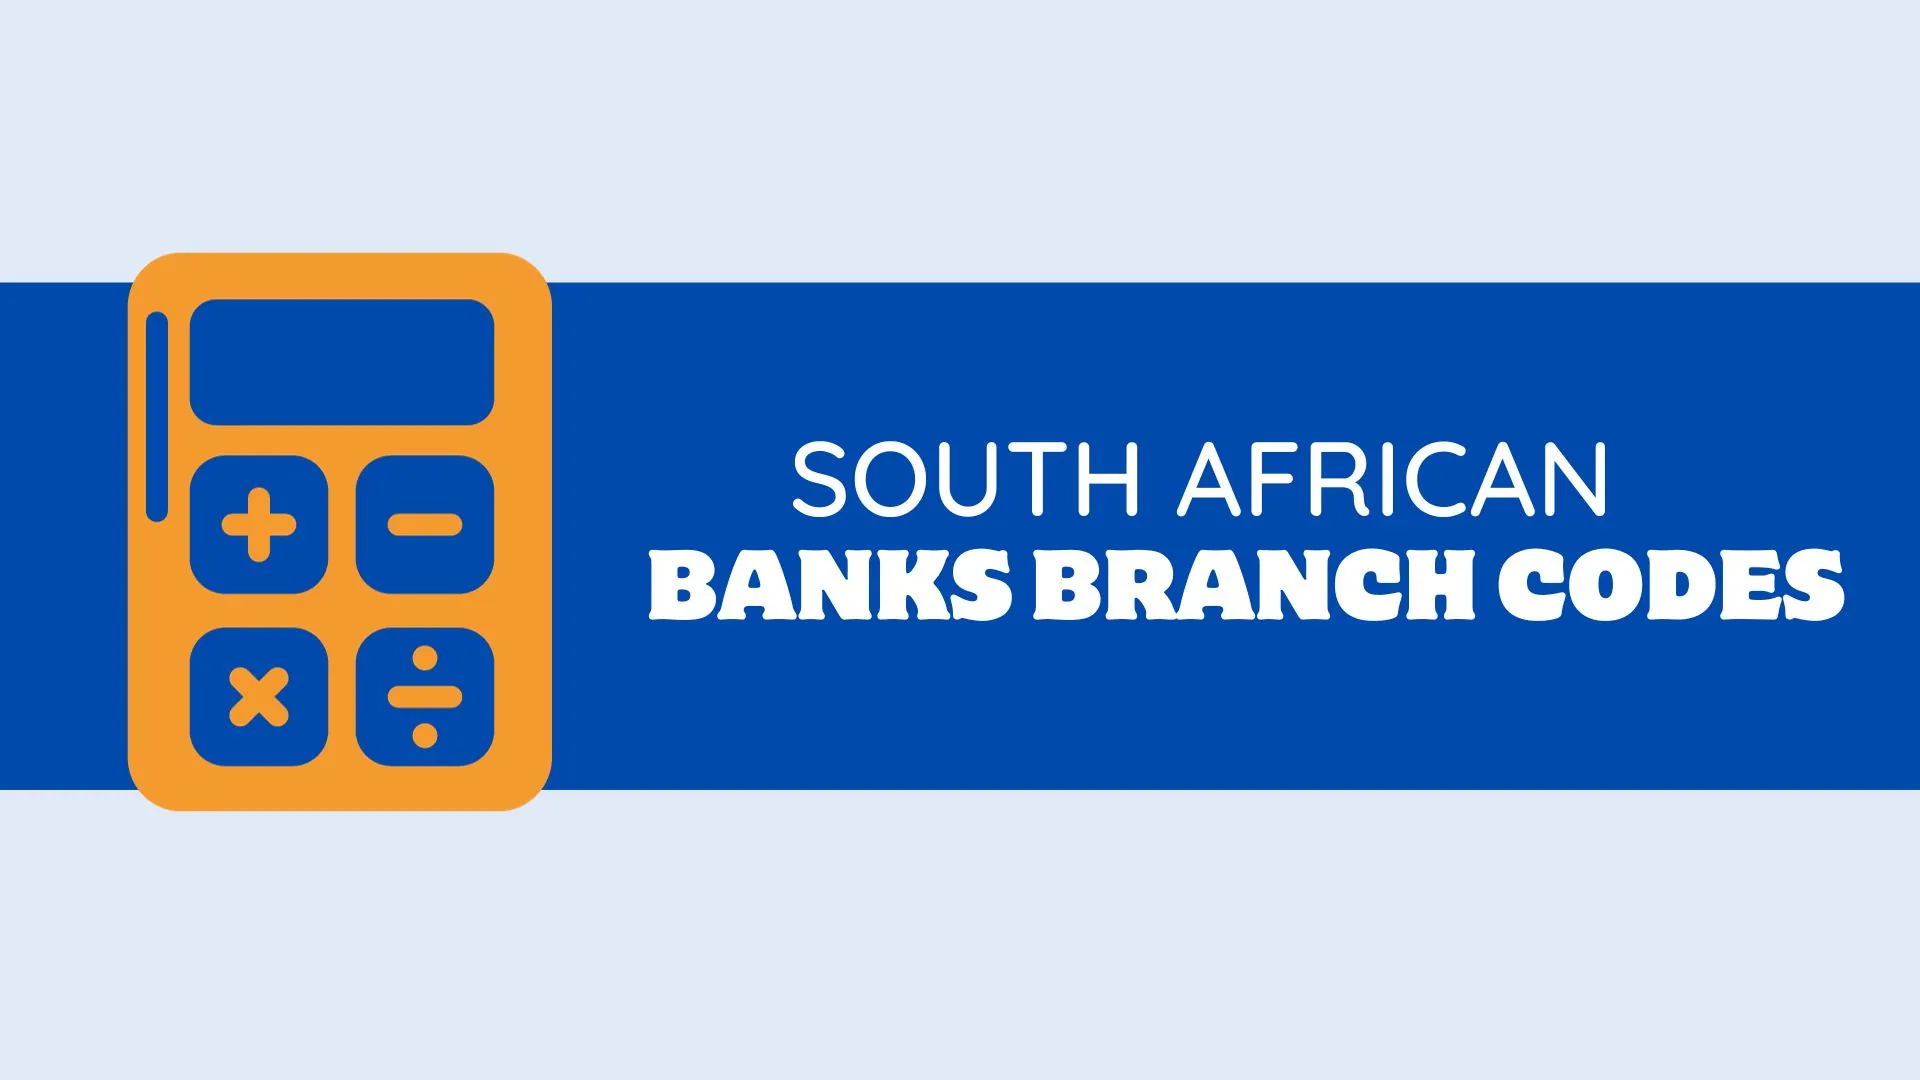 South African Banks Branch Codes